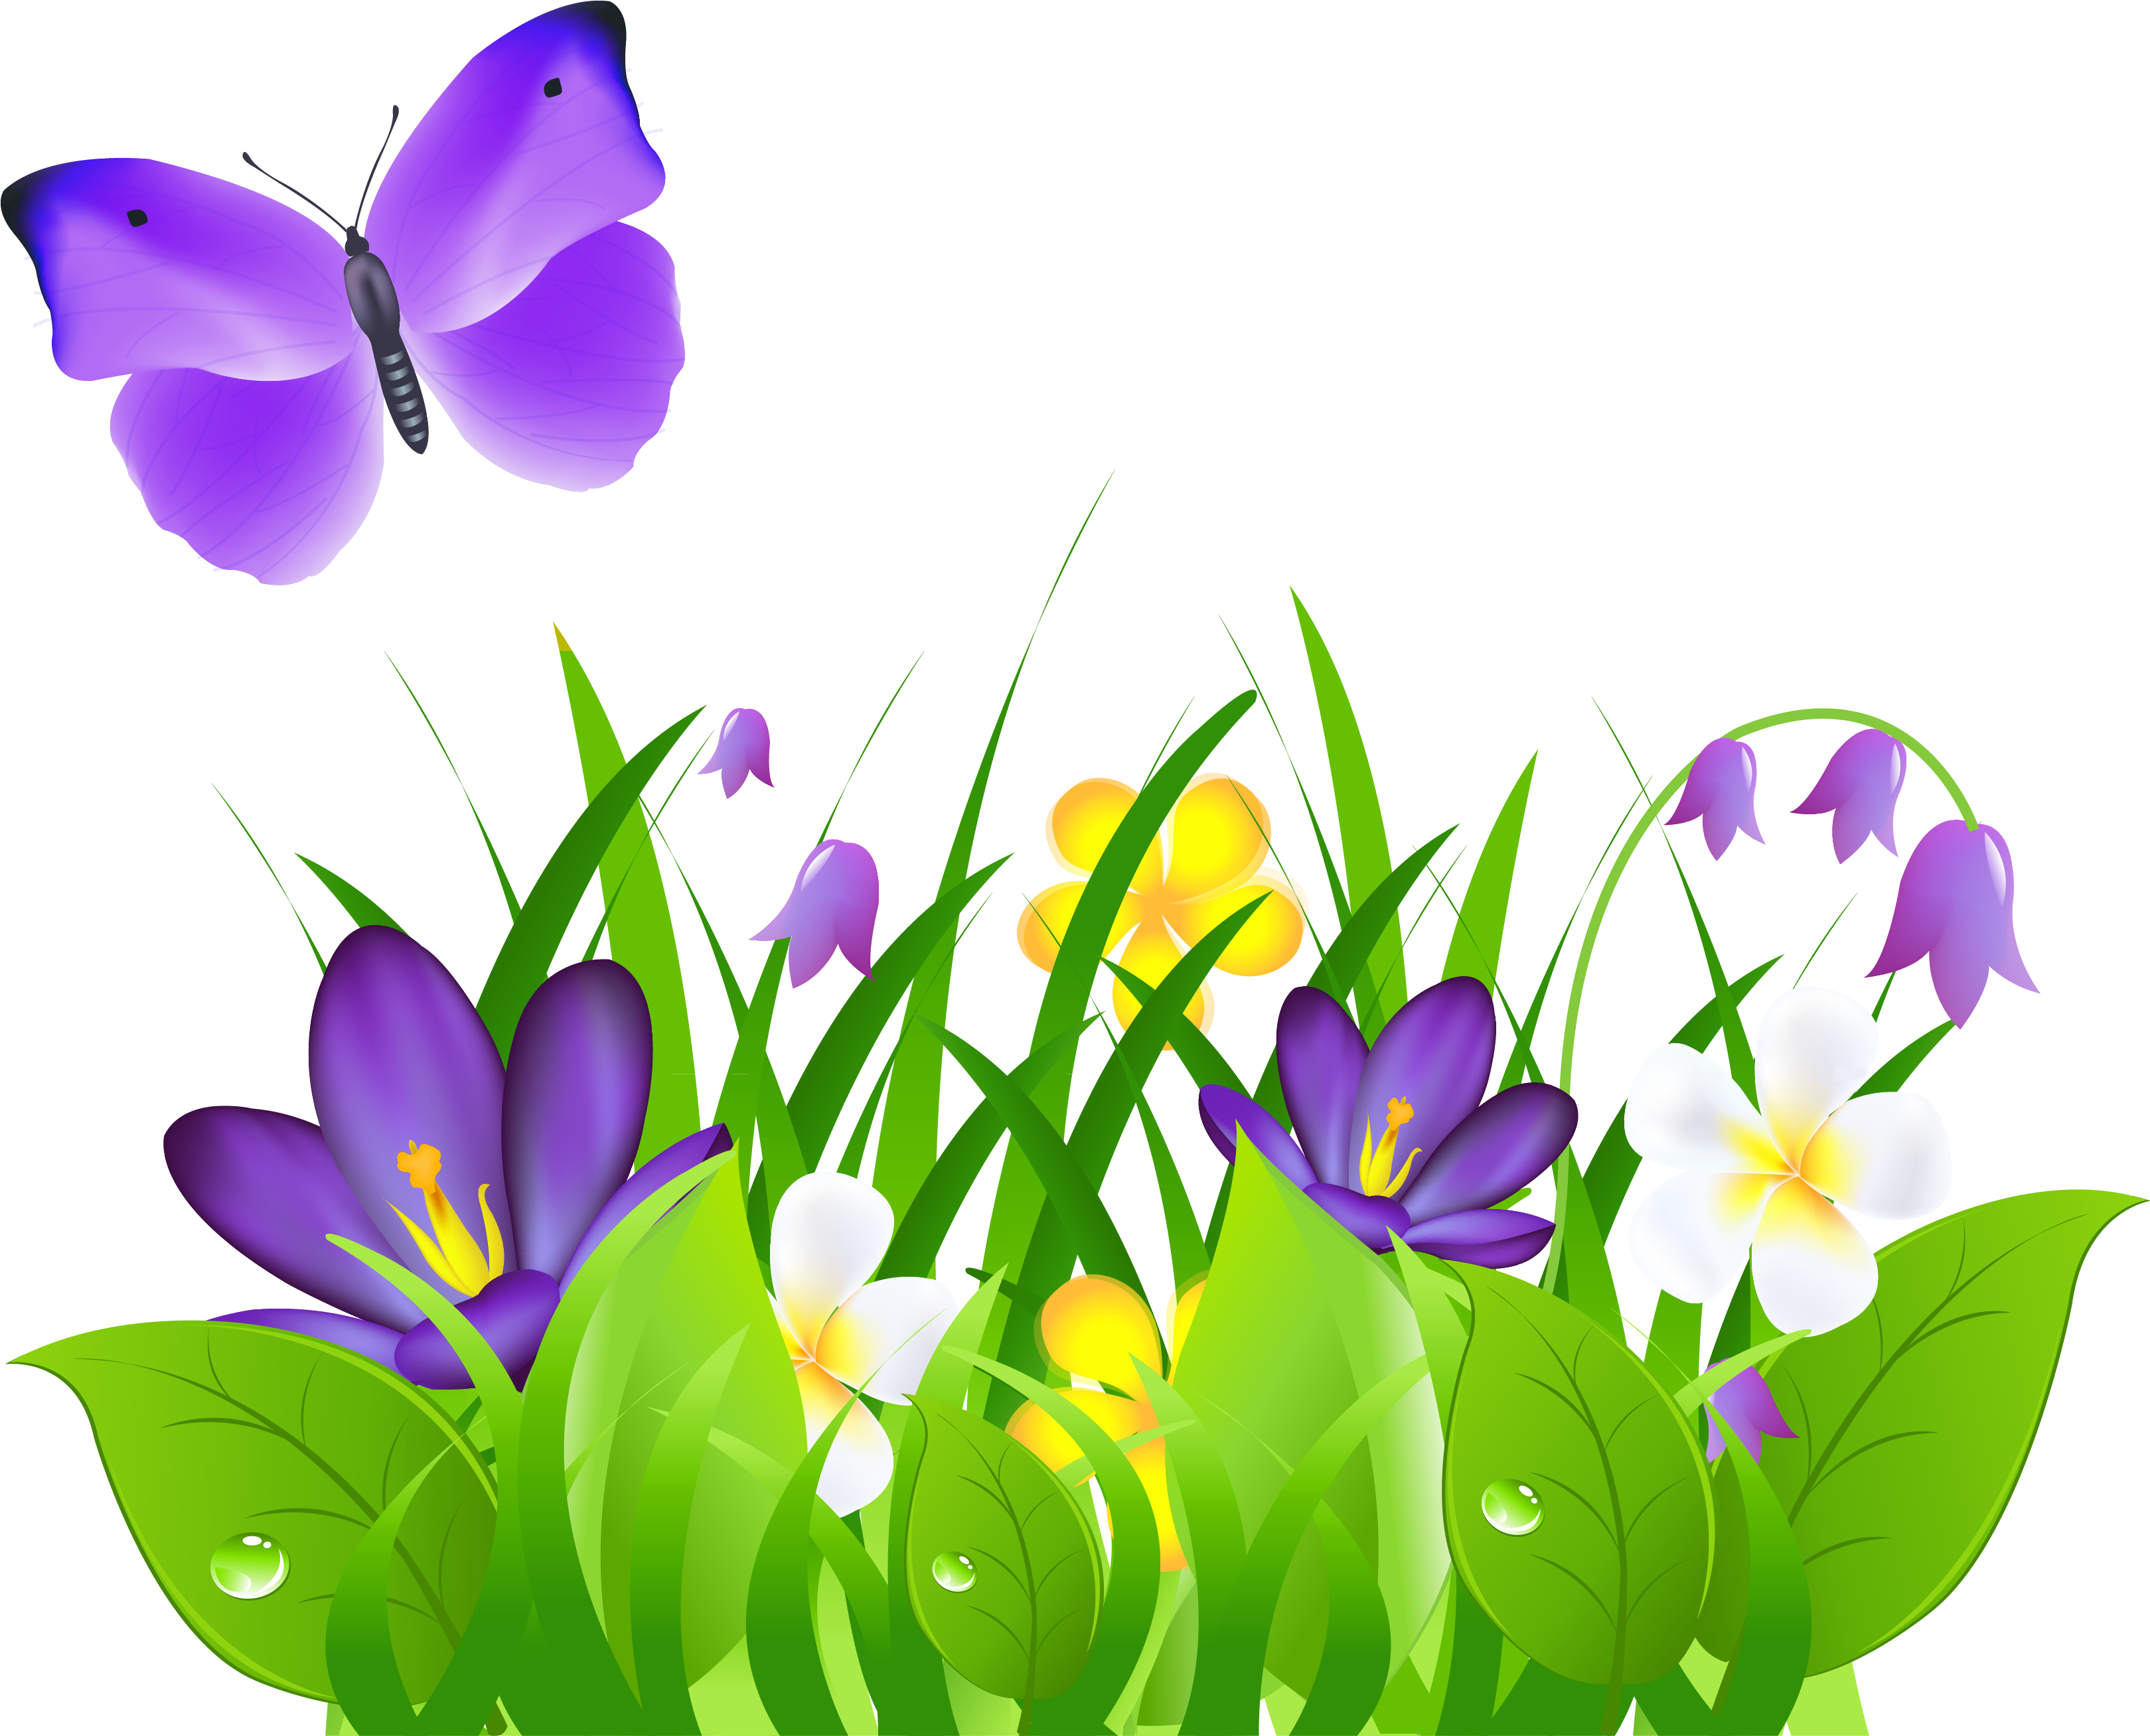 Download and share clipart about Butterfly With Flowers Clipart, Find more ...